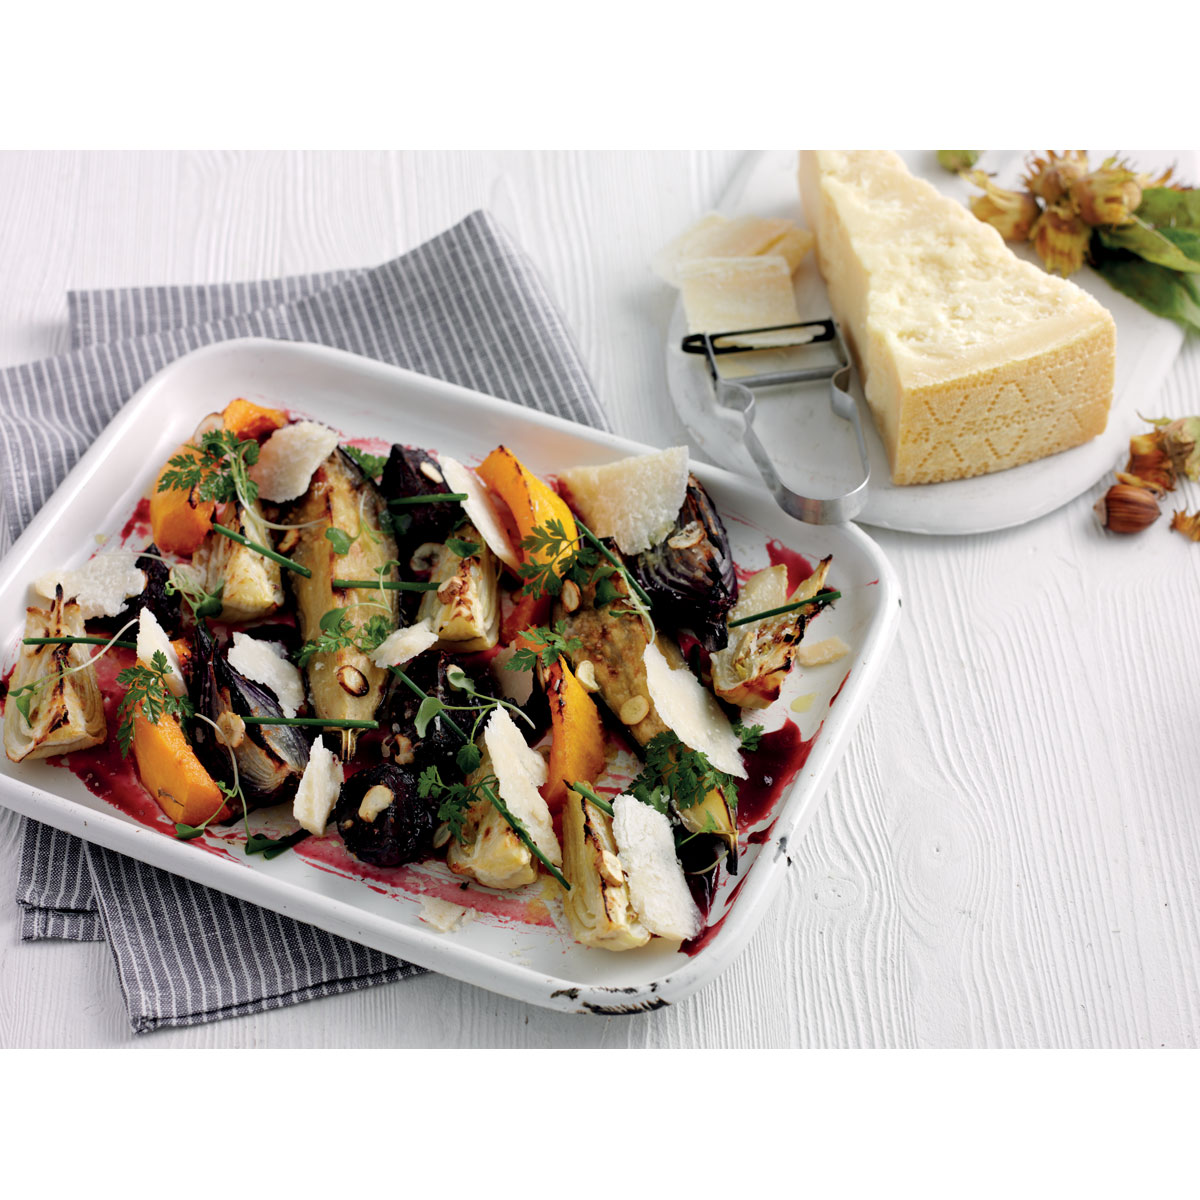 Oven roasted vegetables with fresh hazelnuts or cobnuts, Grana Padano shavings “Agrodolce”